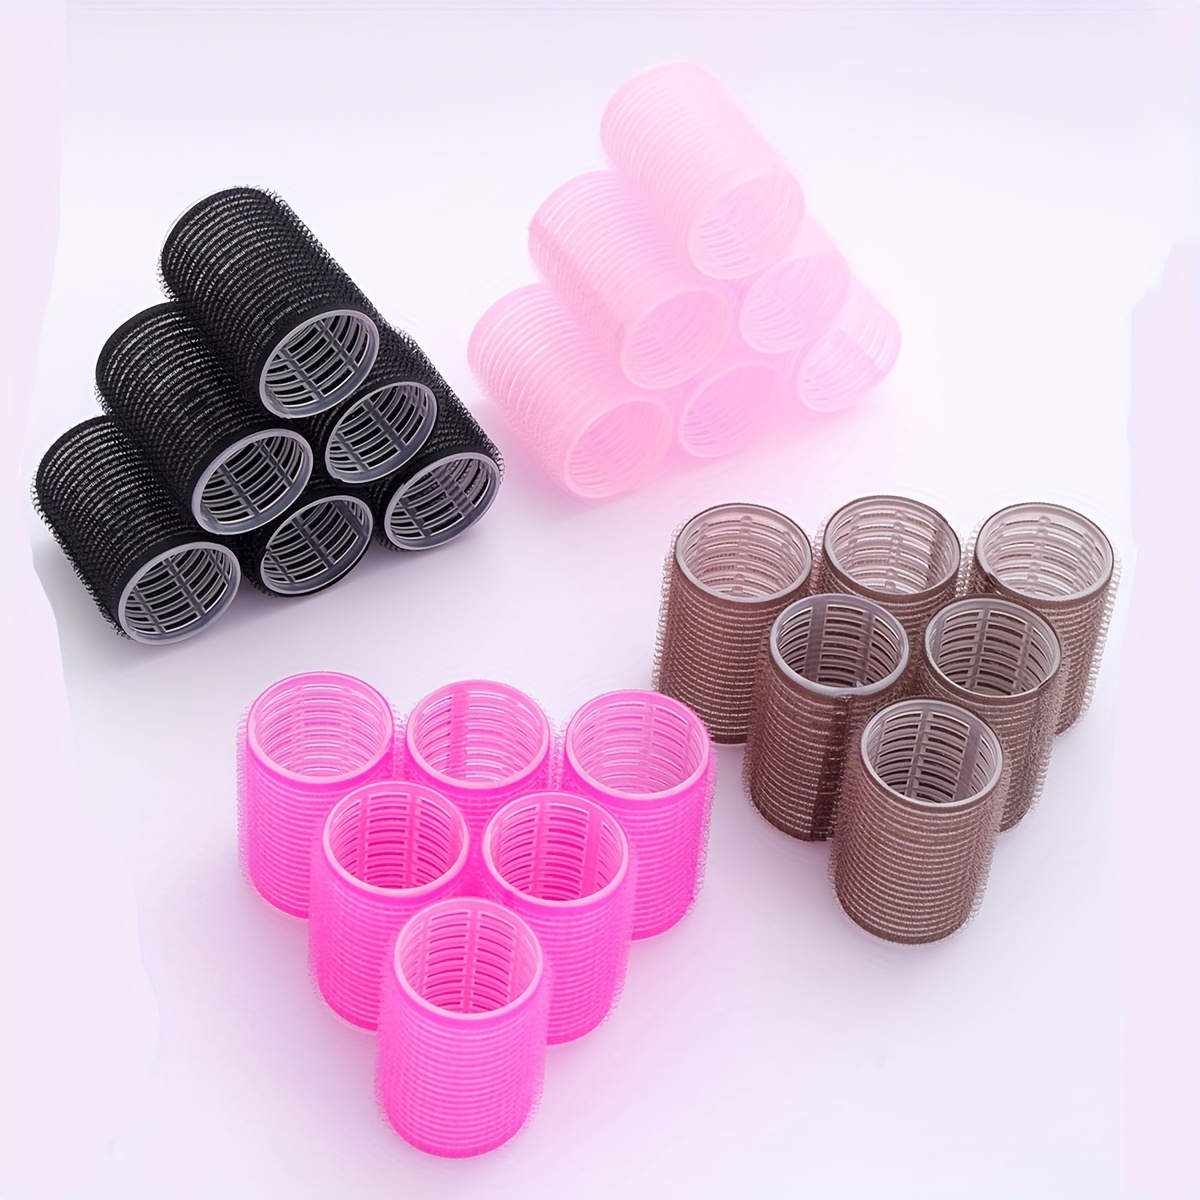 Jumbo Hair Curlers Rollers,24Pcs Big Hair Rollers Set with 12 Hair Curlers  Self Grip Holding Rollers and 12 Stainless Steel Duckbill Clips for Long  Medium Short Thick Fine Thin Hair Bangs Volume